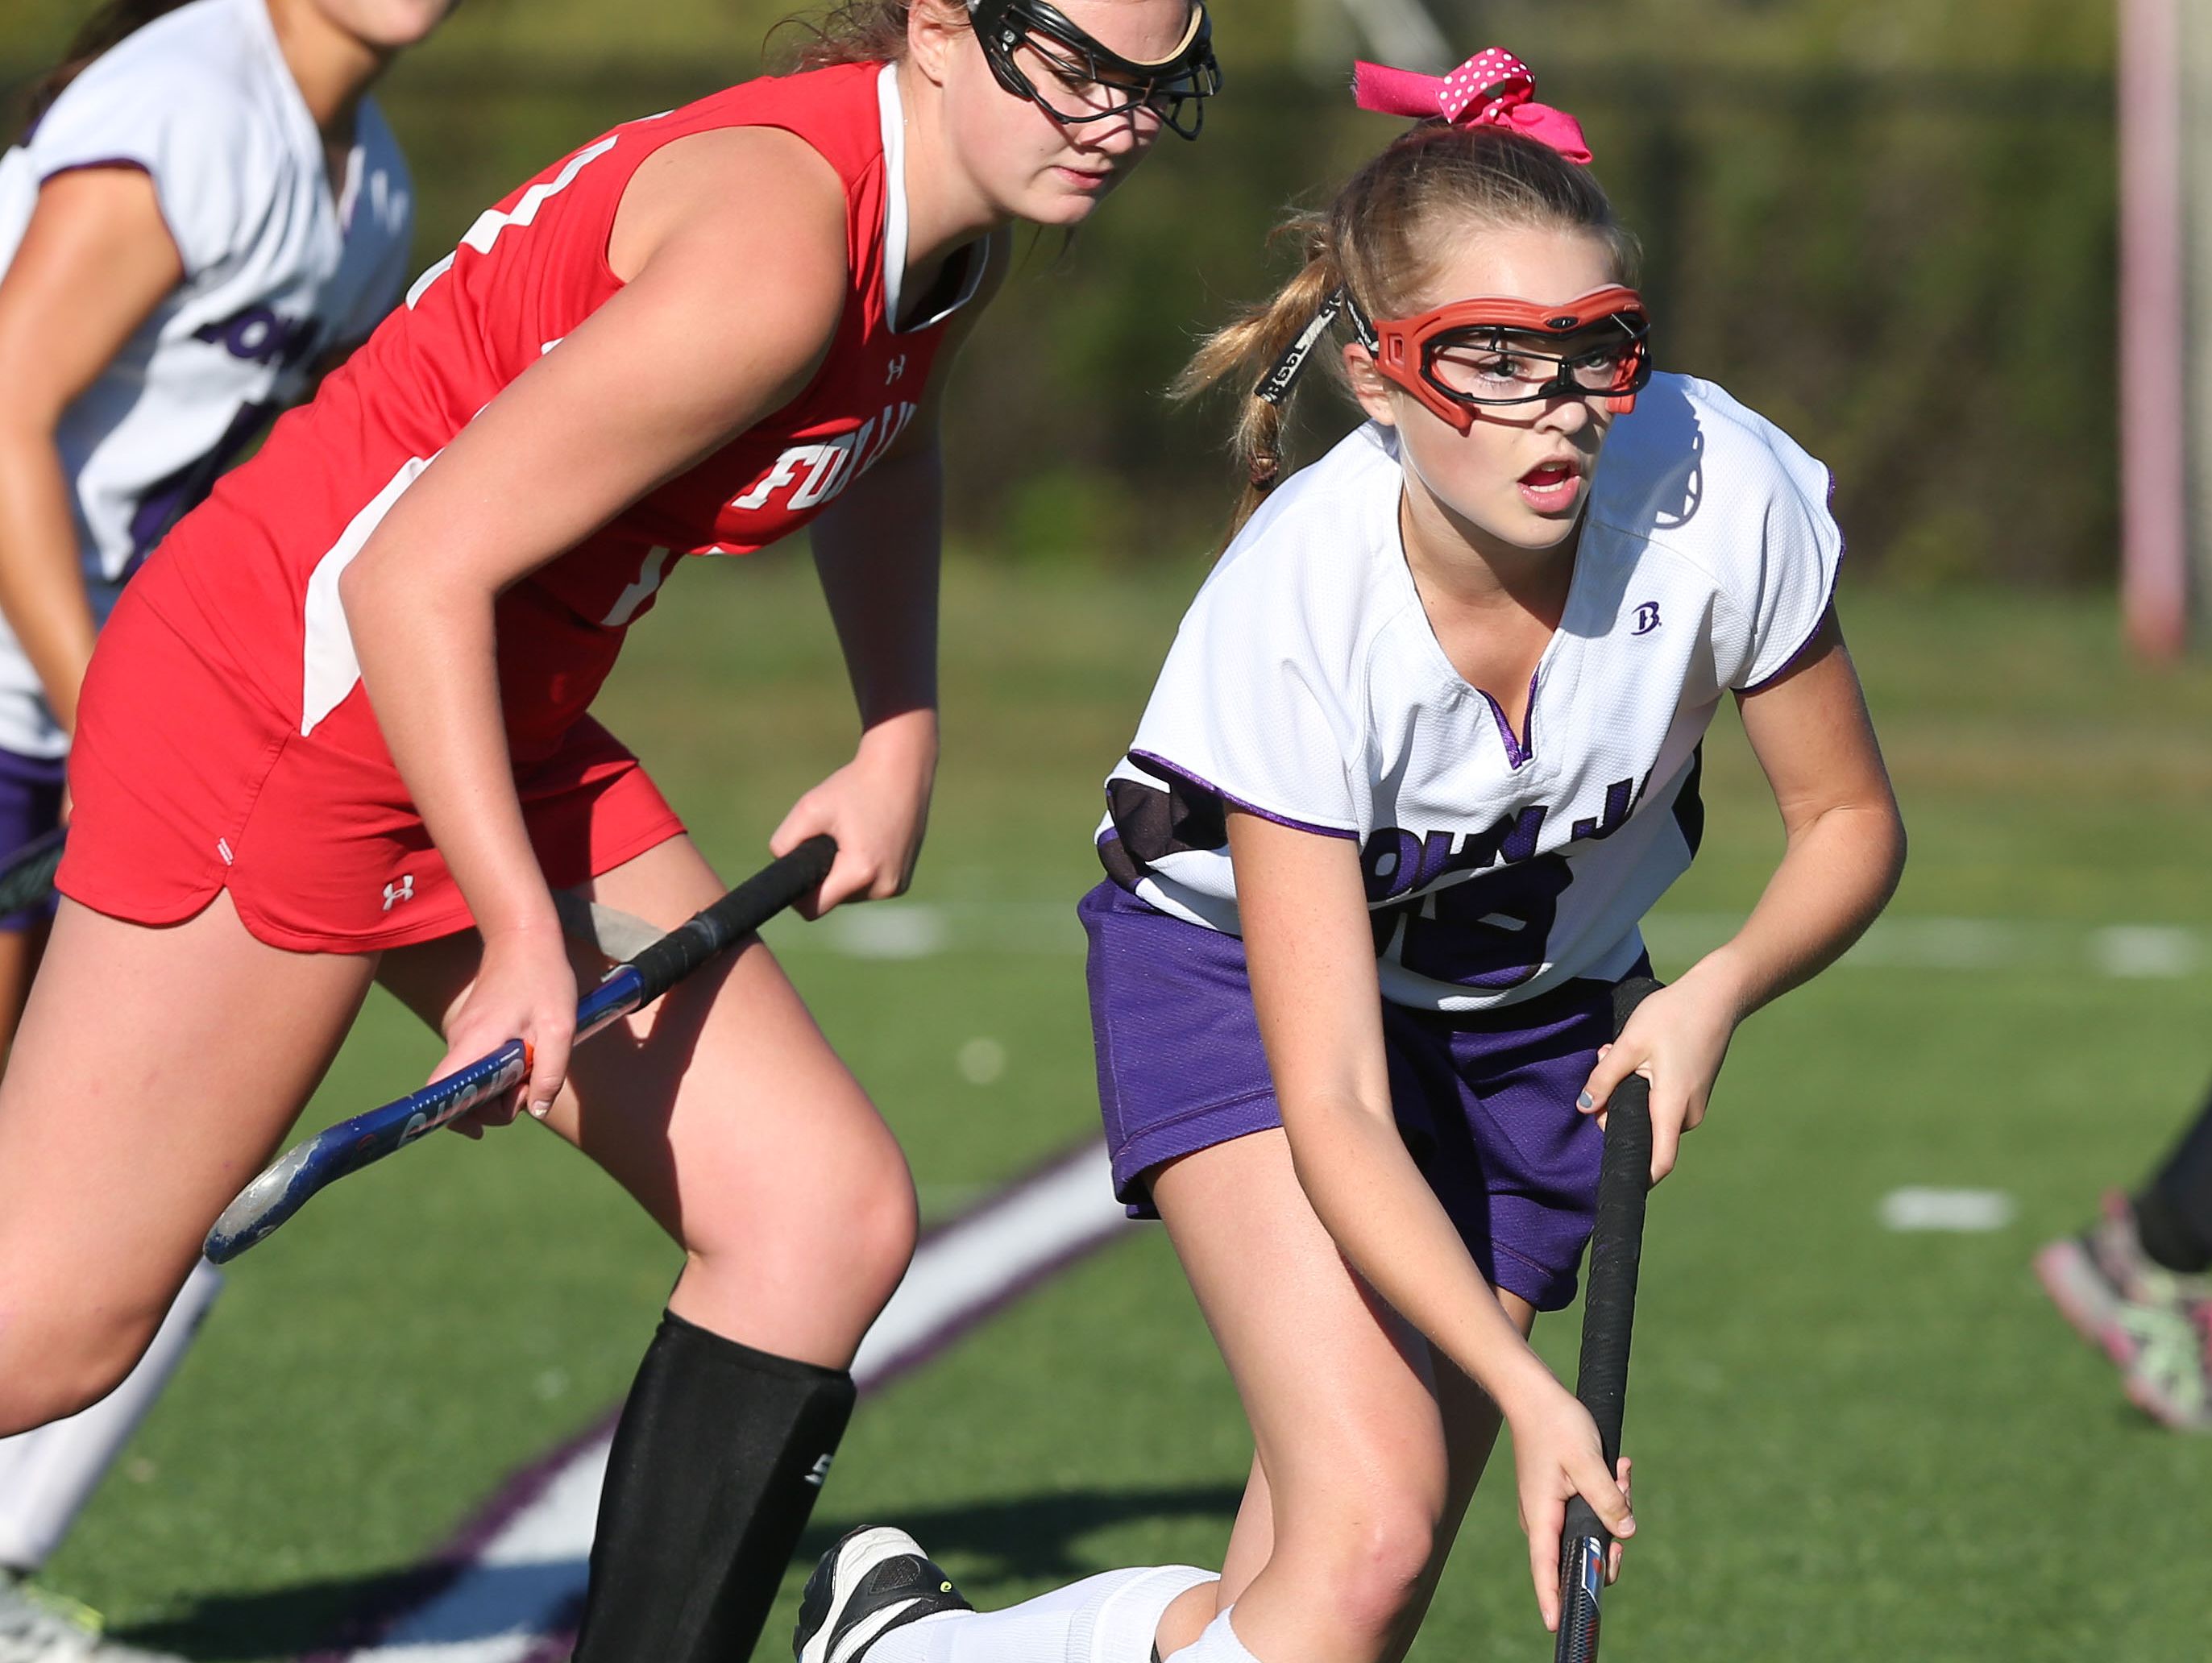 John Jay's Anna Prusko (18) moves the ball away from Fox Lane's Bridgit Connors (17) during field hockey game at John Jay High School in Cross River Oct. 6, 2016. The game ended in a 3-3 tie.